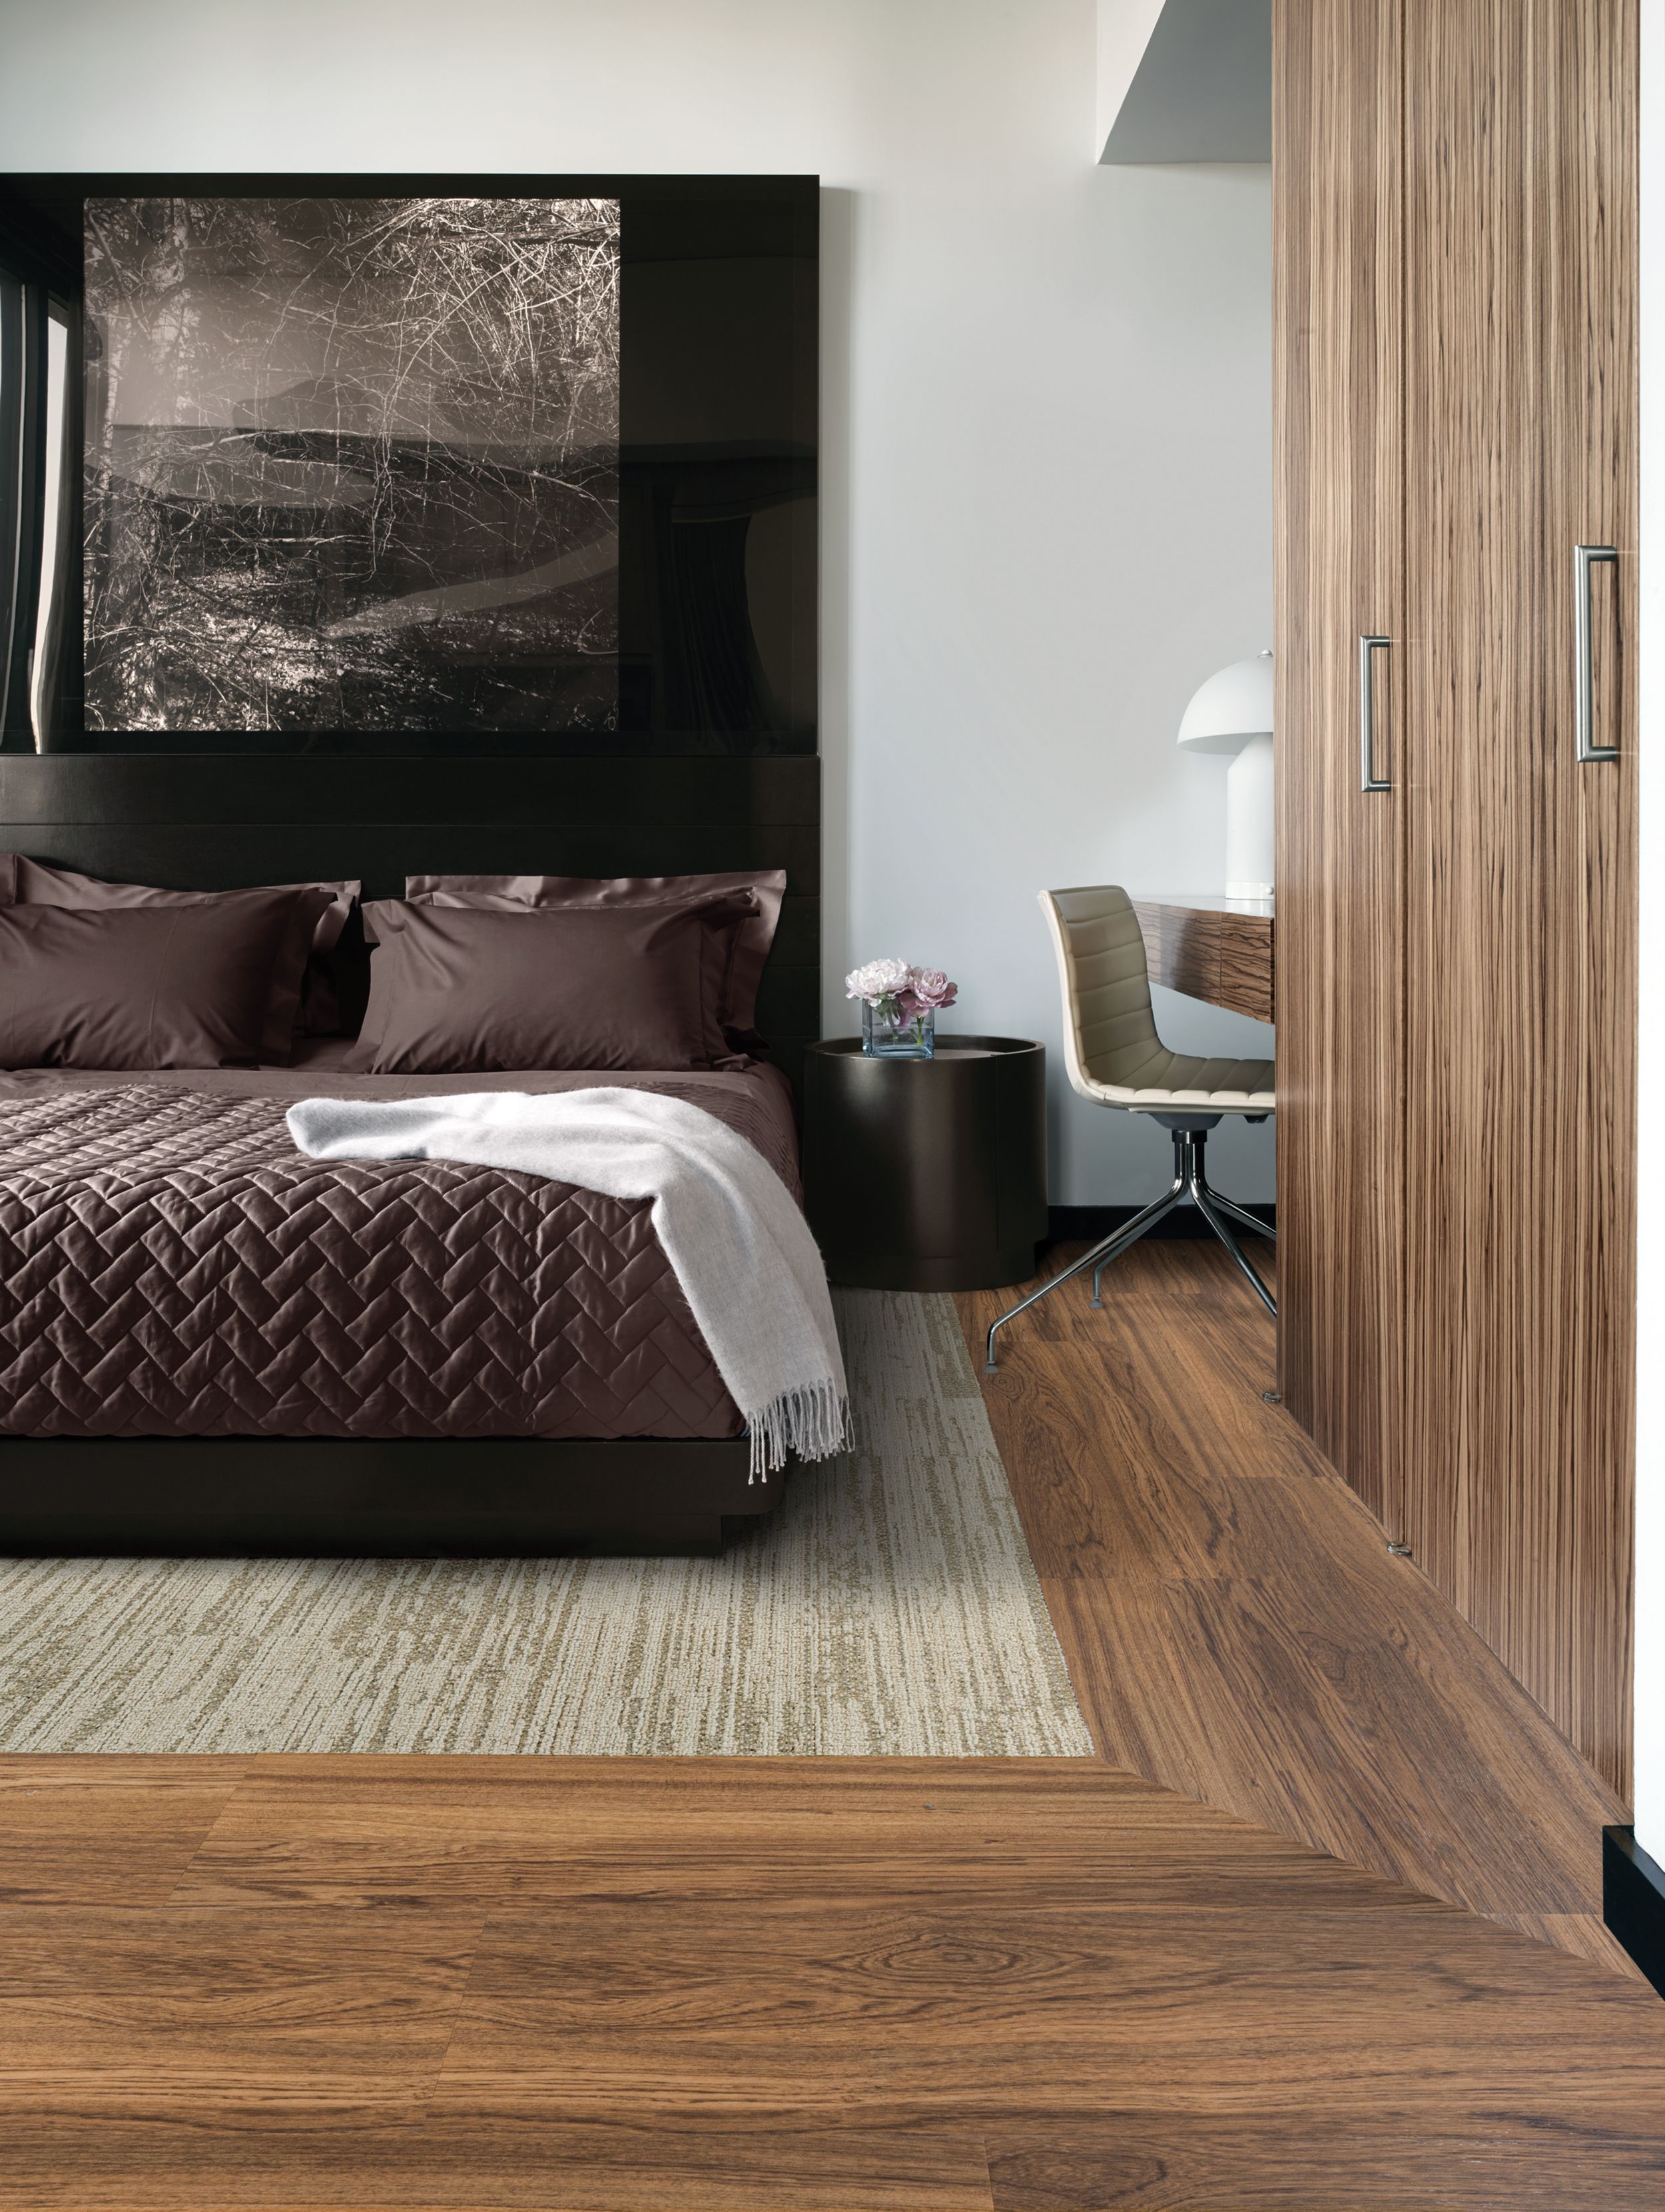 Interface RMS 510 plank carpet tile with Natural Woodograins LVT in hotel guest room with robe on bed imagen número 5